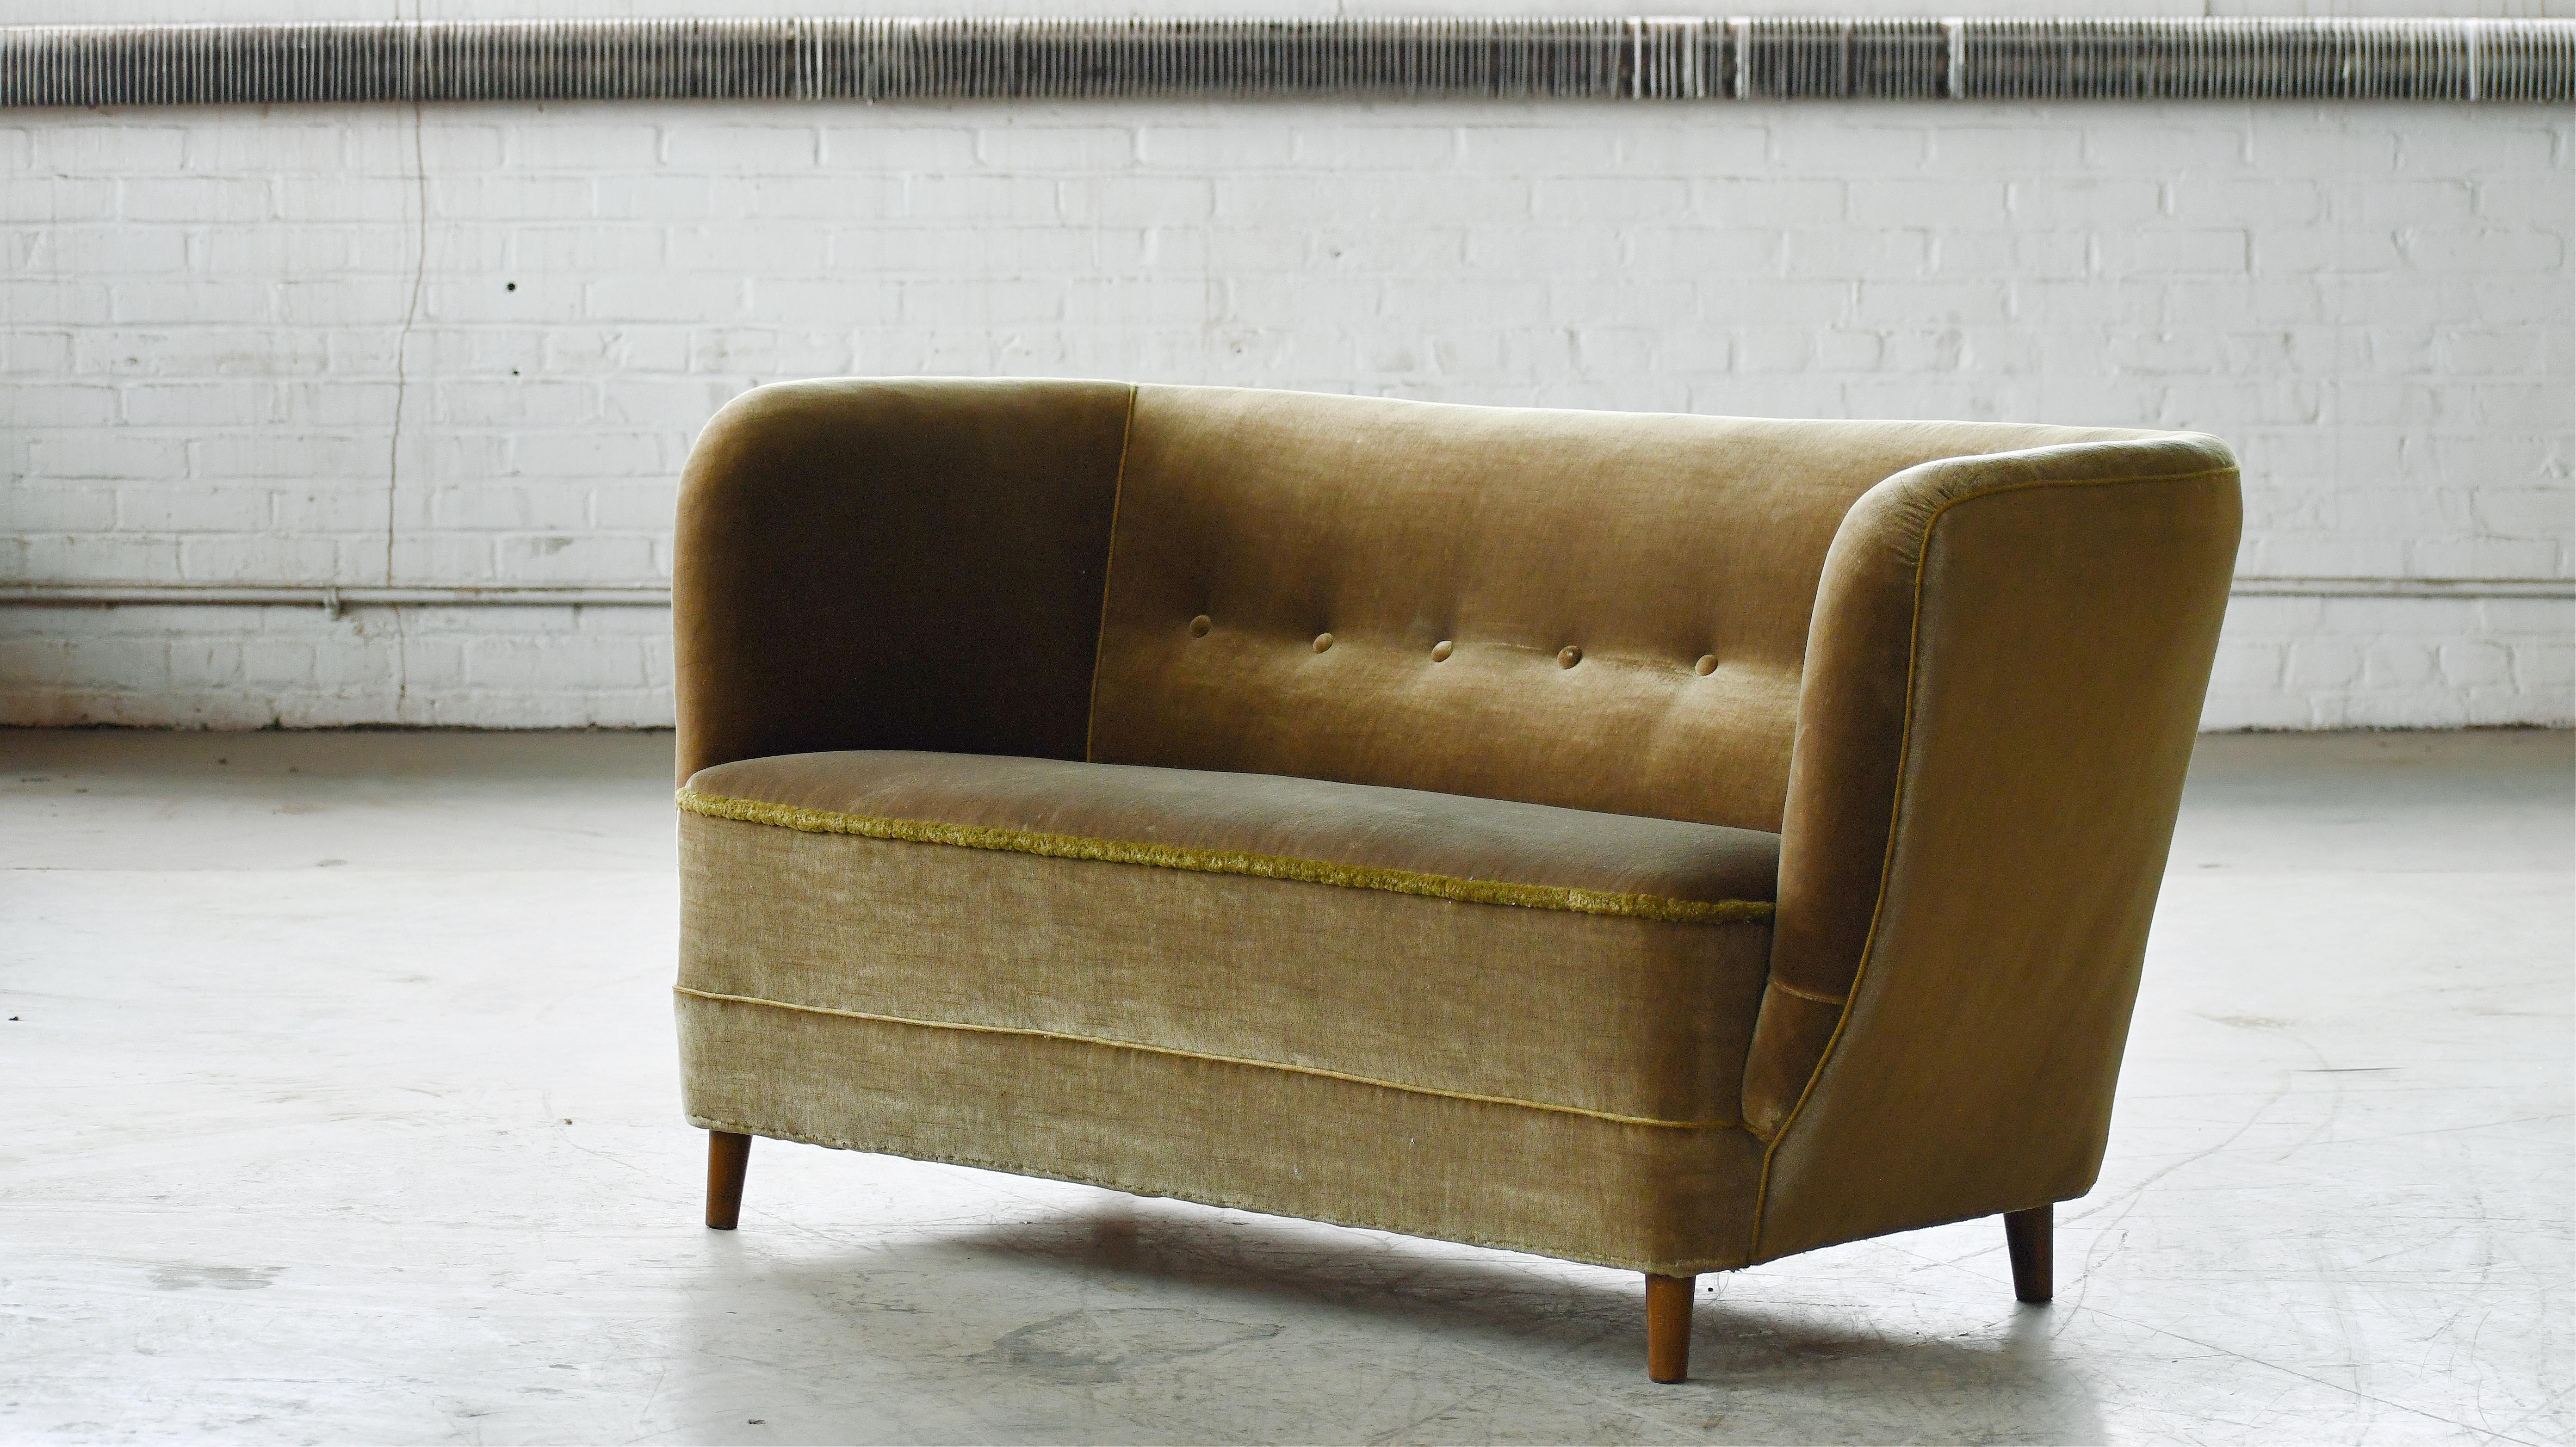 Charming Danish 1950's loveseat. From the era of the curved 